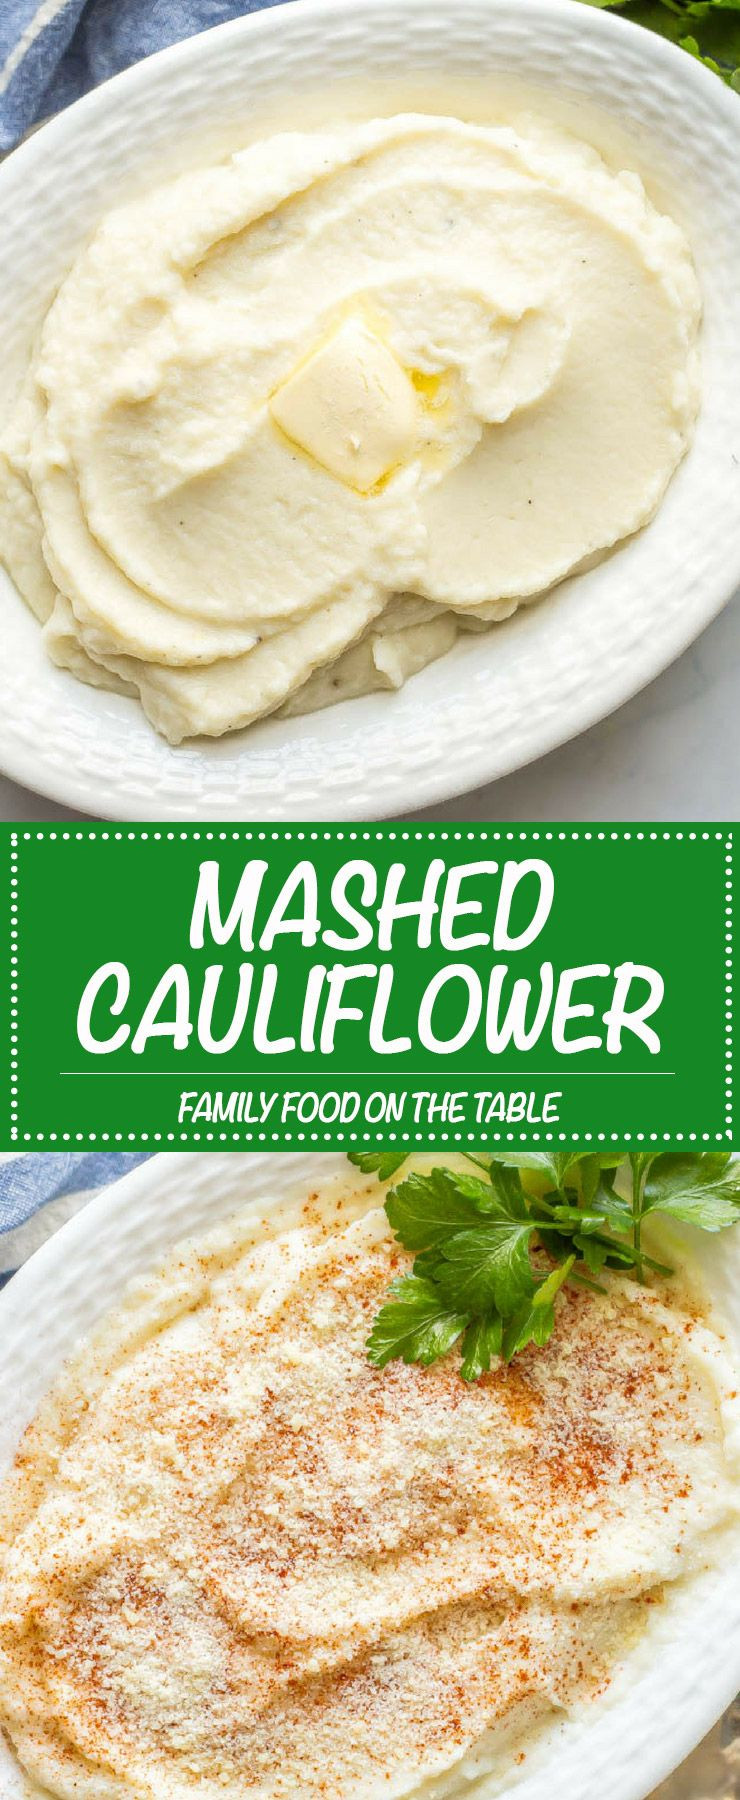 Low Calorie Vegetable Side Dishes
 Healthy mashed cauliflower Recipe